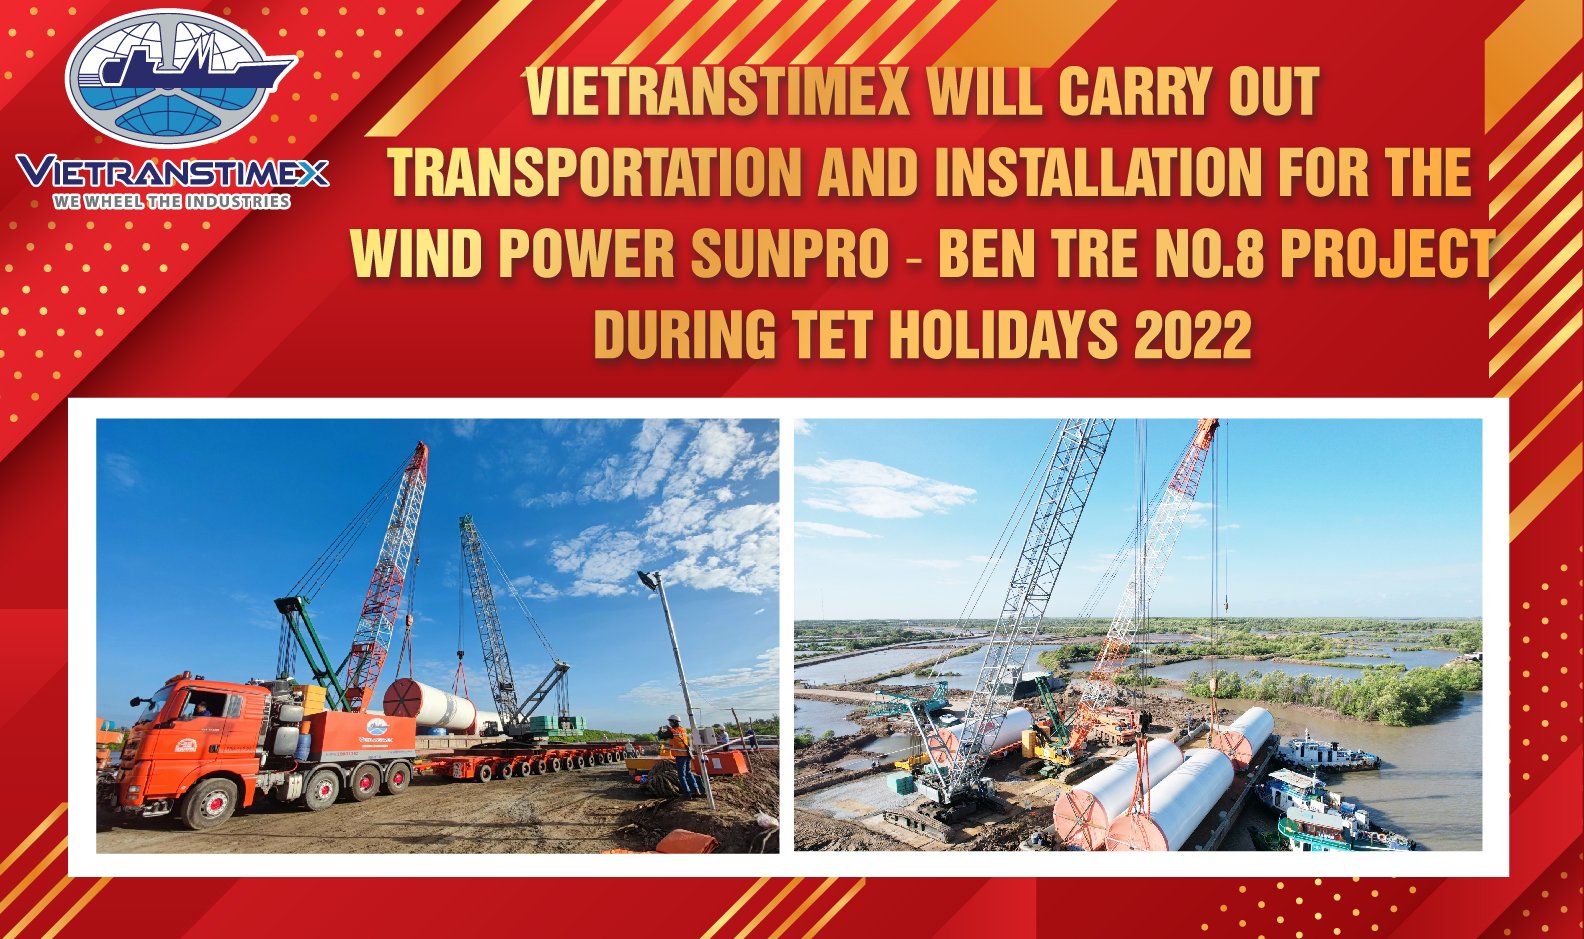 Vietranstimex Will Carry Out Transportation and Installation for The Wind Power Sunpro – Ben Tre No.8 Project during Tet Holidays 2022